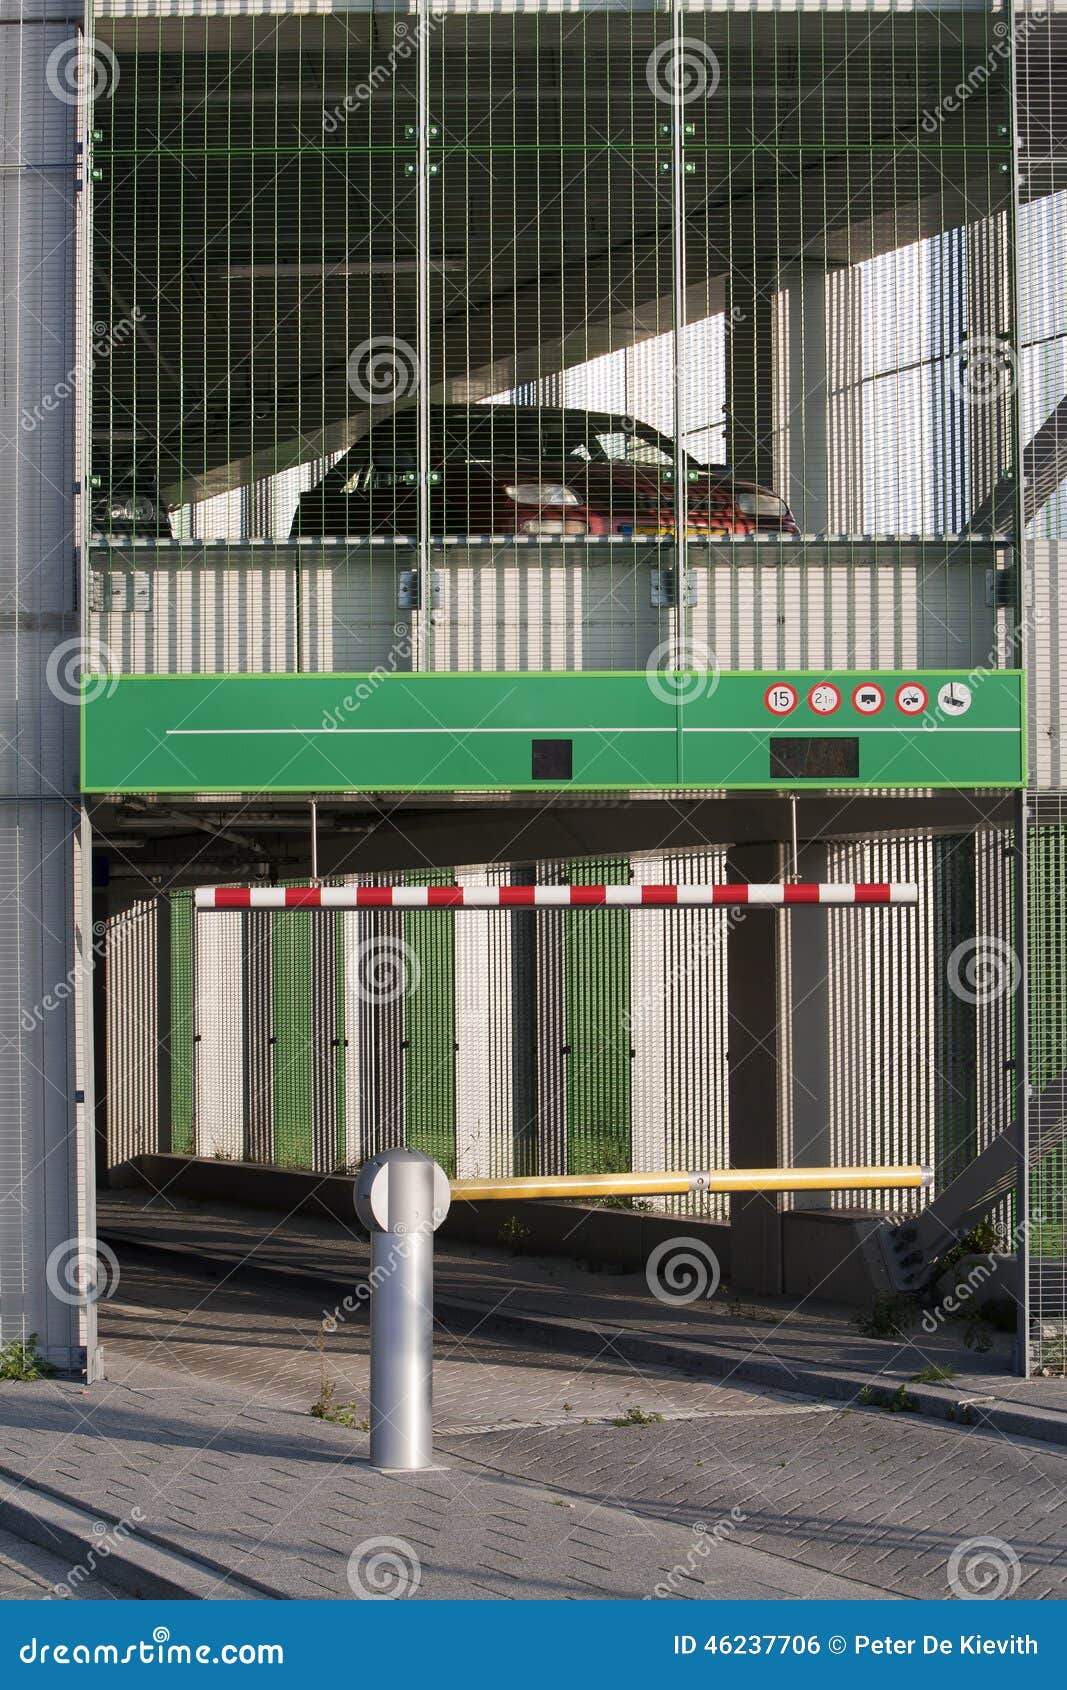 Parking garage gate stock photo. Image of green, structure - 46237706